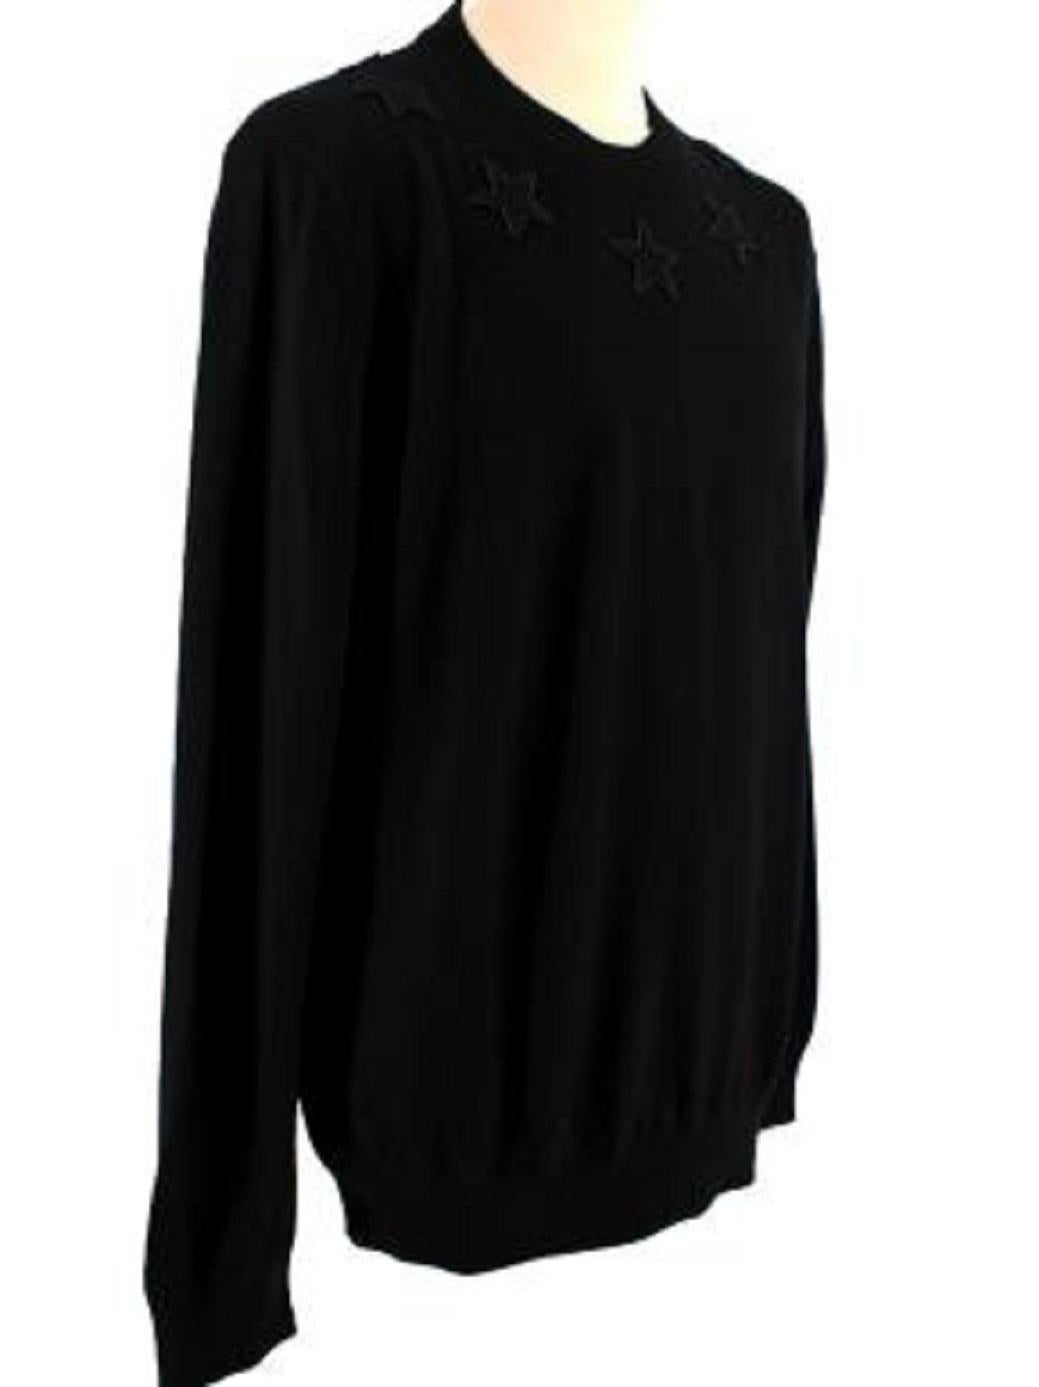 Givenchy Black Wool Knit Star Jumper

-Round collar 
-Star patches around the collar 
-Ribbed neckline, hem and cuffs 
-Relaxed fit 

Material: 

100% Wool 

Made in China 

PLEASE NOTE, THESE ITEMS ARE PRE-OWNED AND MAY SHOW SIGNS OF BEING STORED